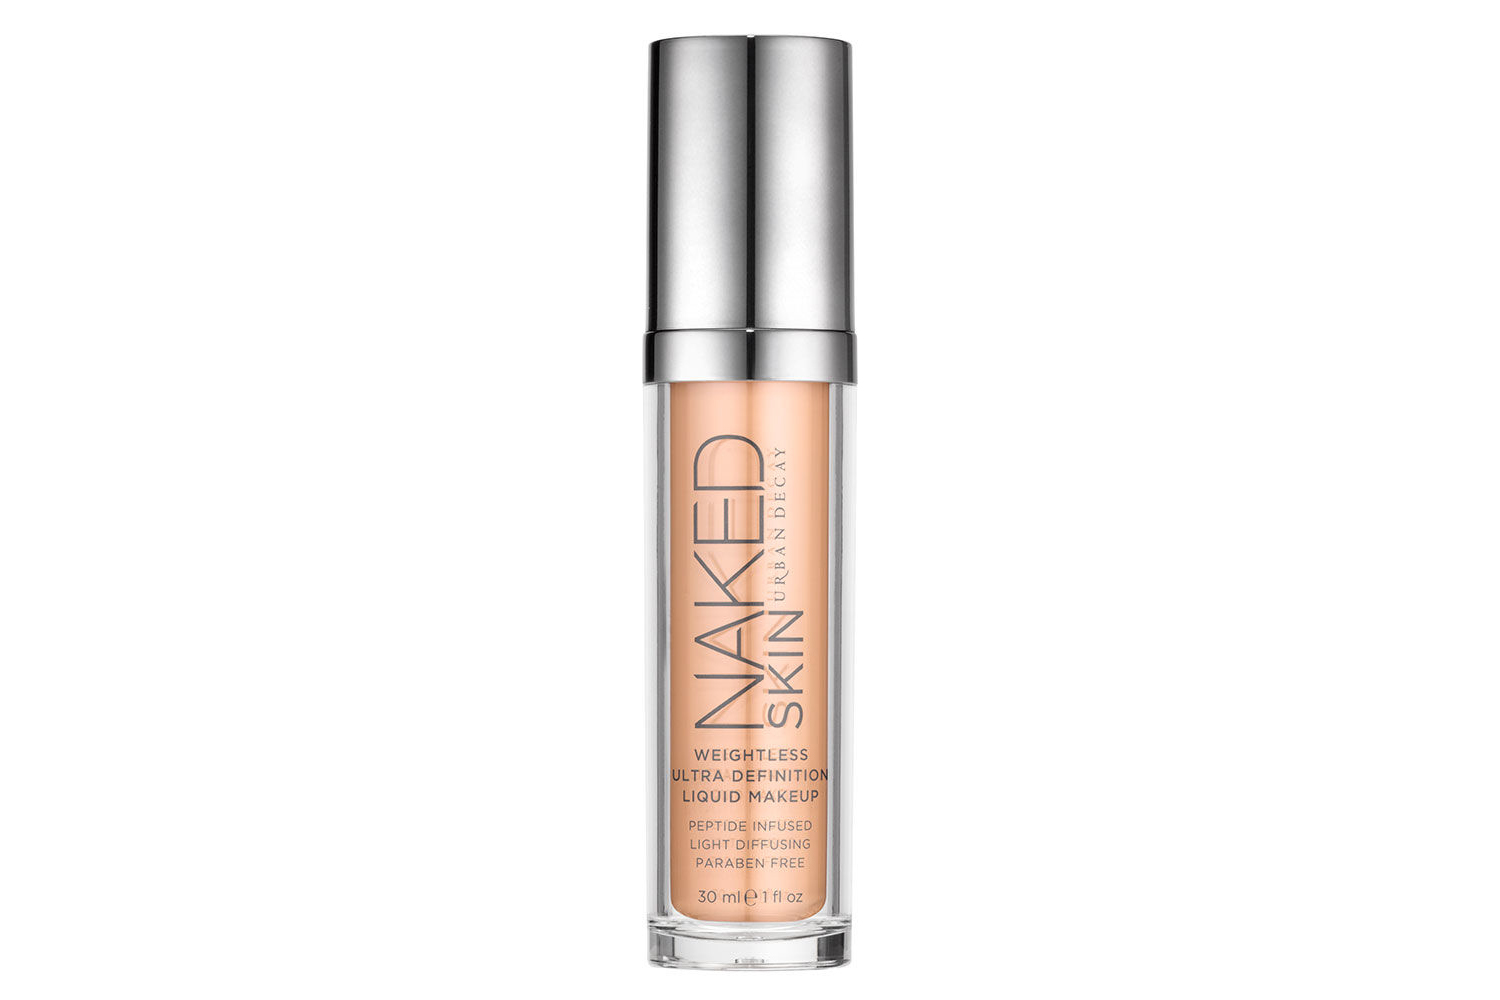 Urban Decay Naked Weightless Ultra Definition Liquid Make-up Skin Foundation, £28.50